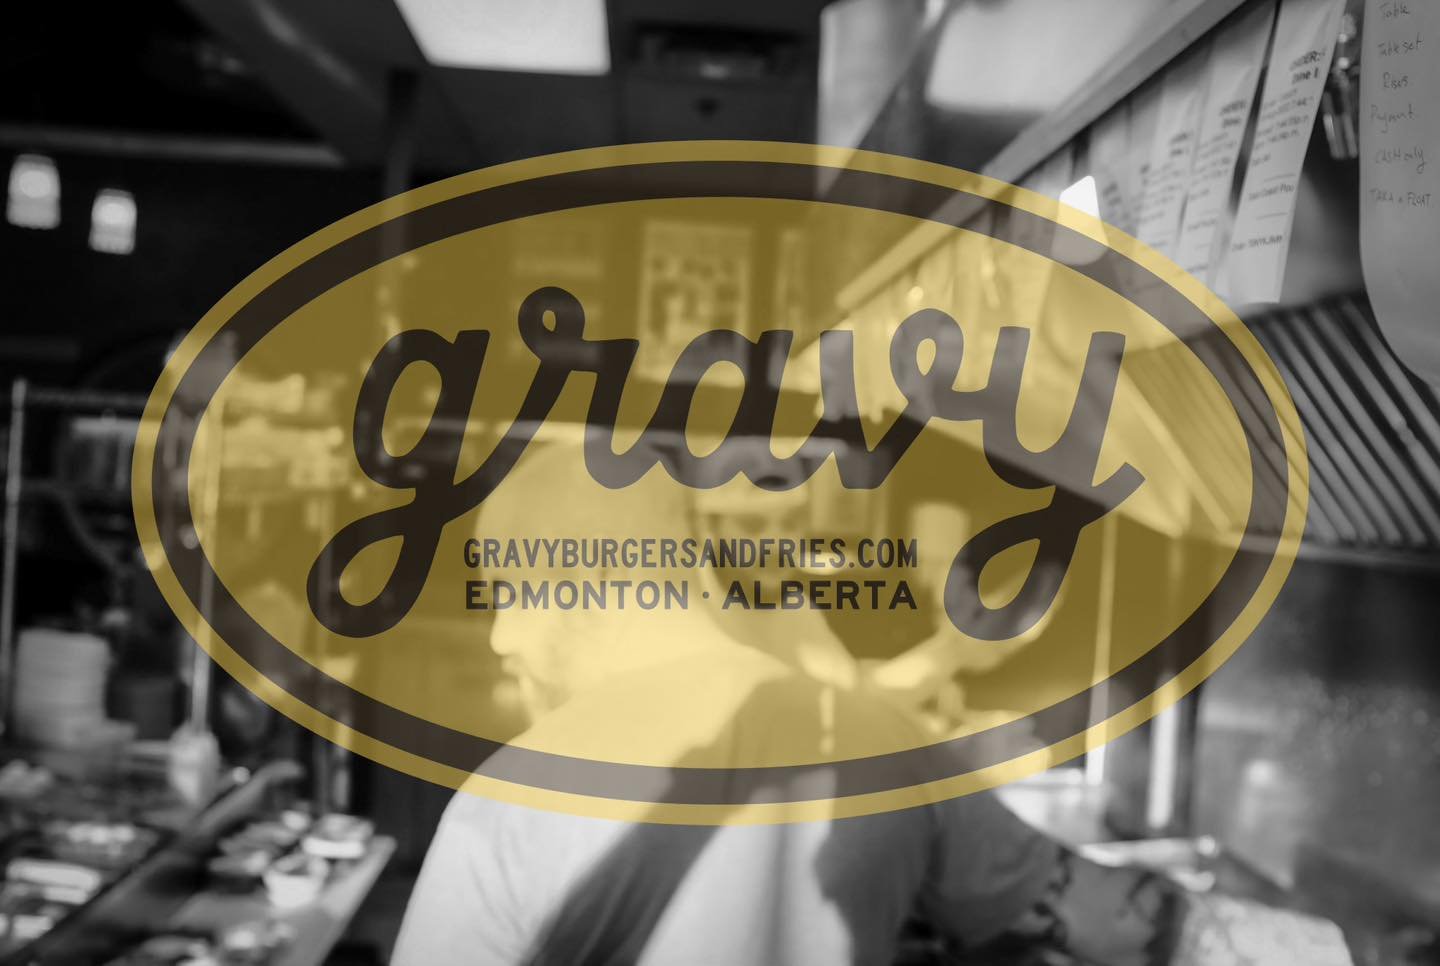 Dear Friends of Gravy,

It pains us to inform you, the community whom we&rsquo;ve had the pleasure of feeding these past 8 years, that we have made the difficult decision to close our doors. 

Our last day open will be Saturday, April 13, 11am - 8pm.